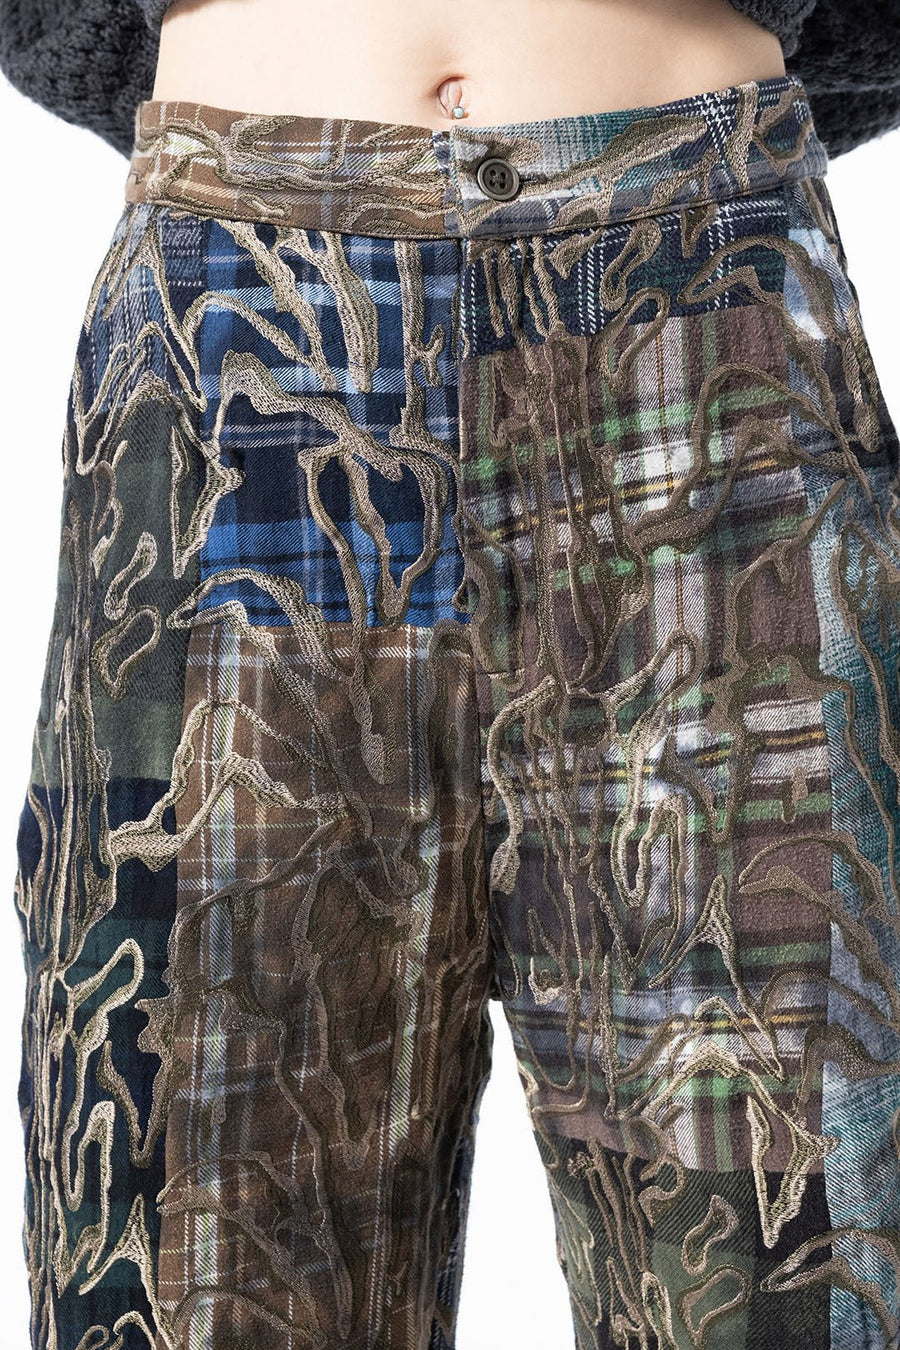 THE DRYAD TROUSERS, MULTI - Burning Torch Online Boutique